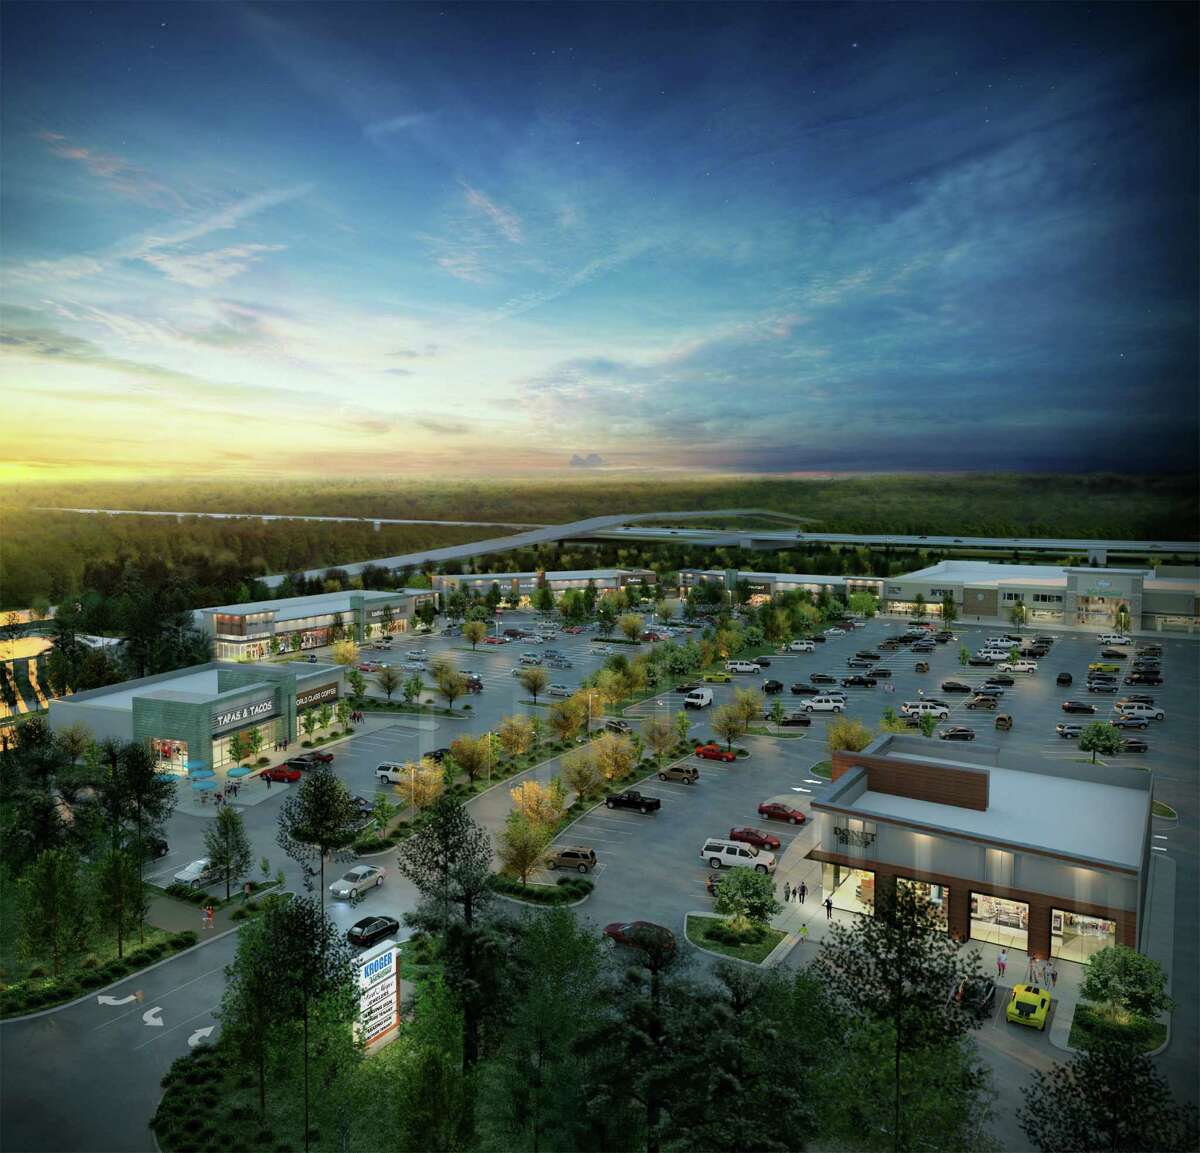 ﻿The Market at Springwoods Village is a joint venture of Regency Centers and CDC Houston.﻿